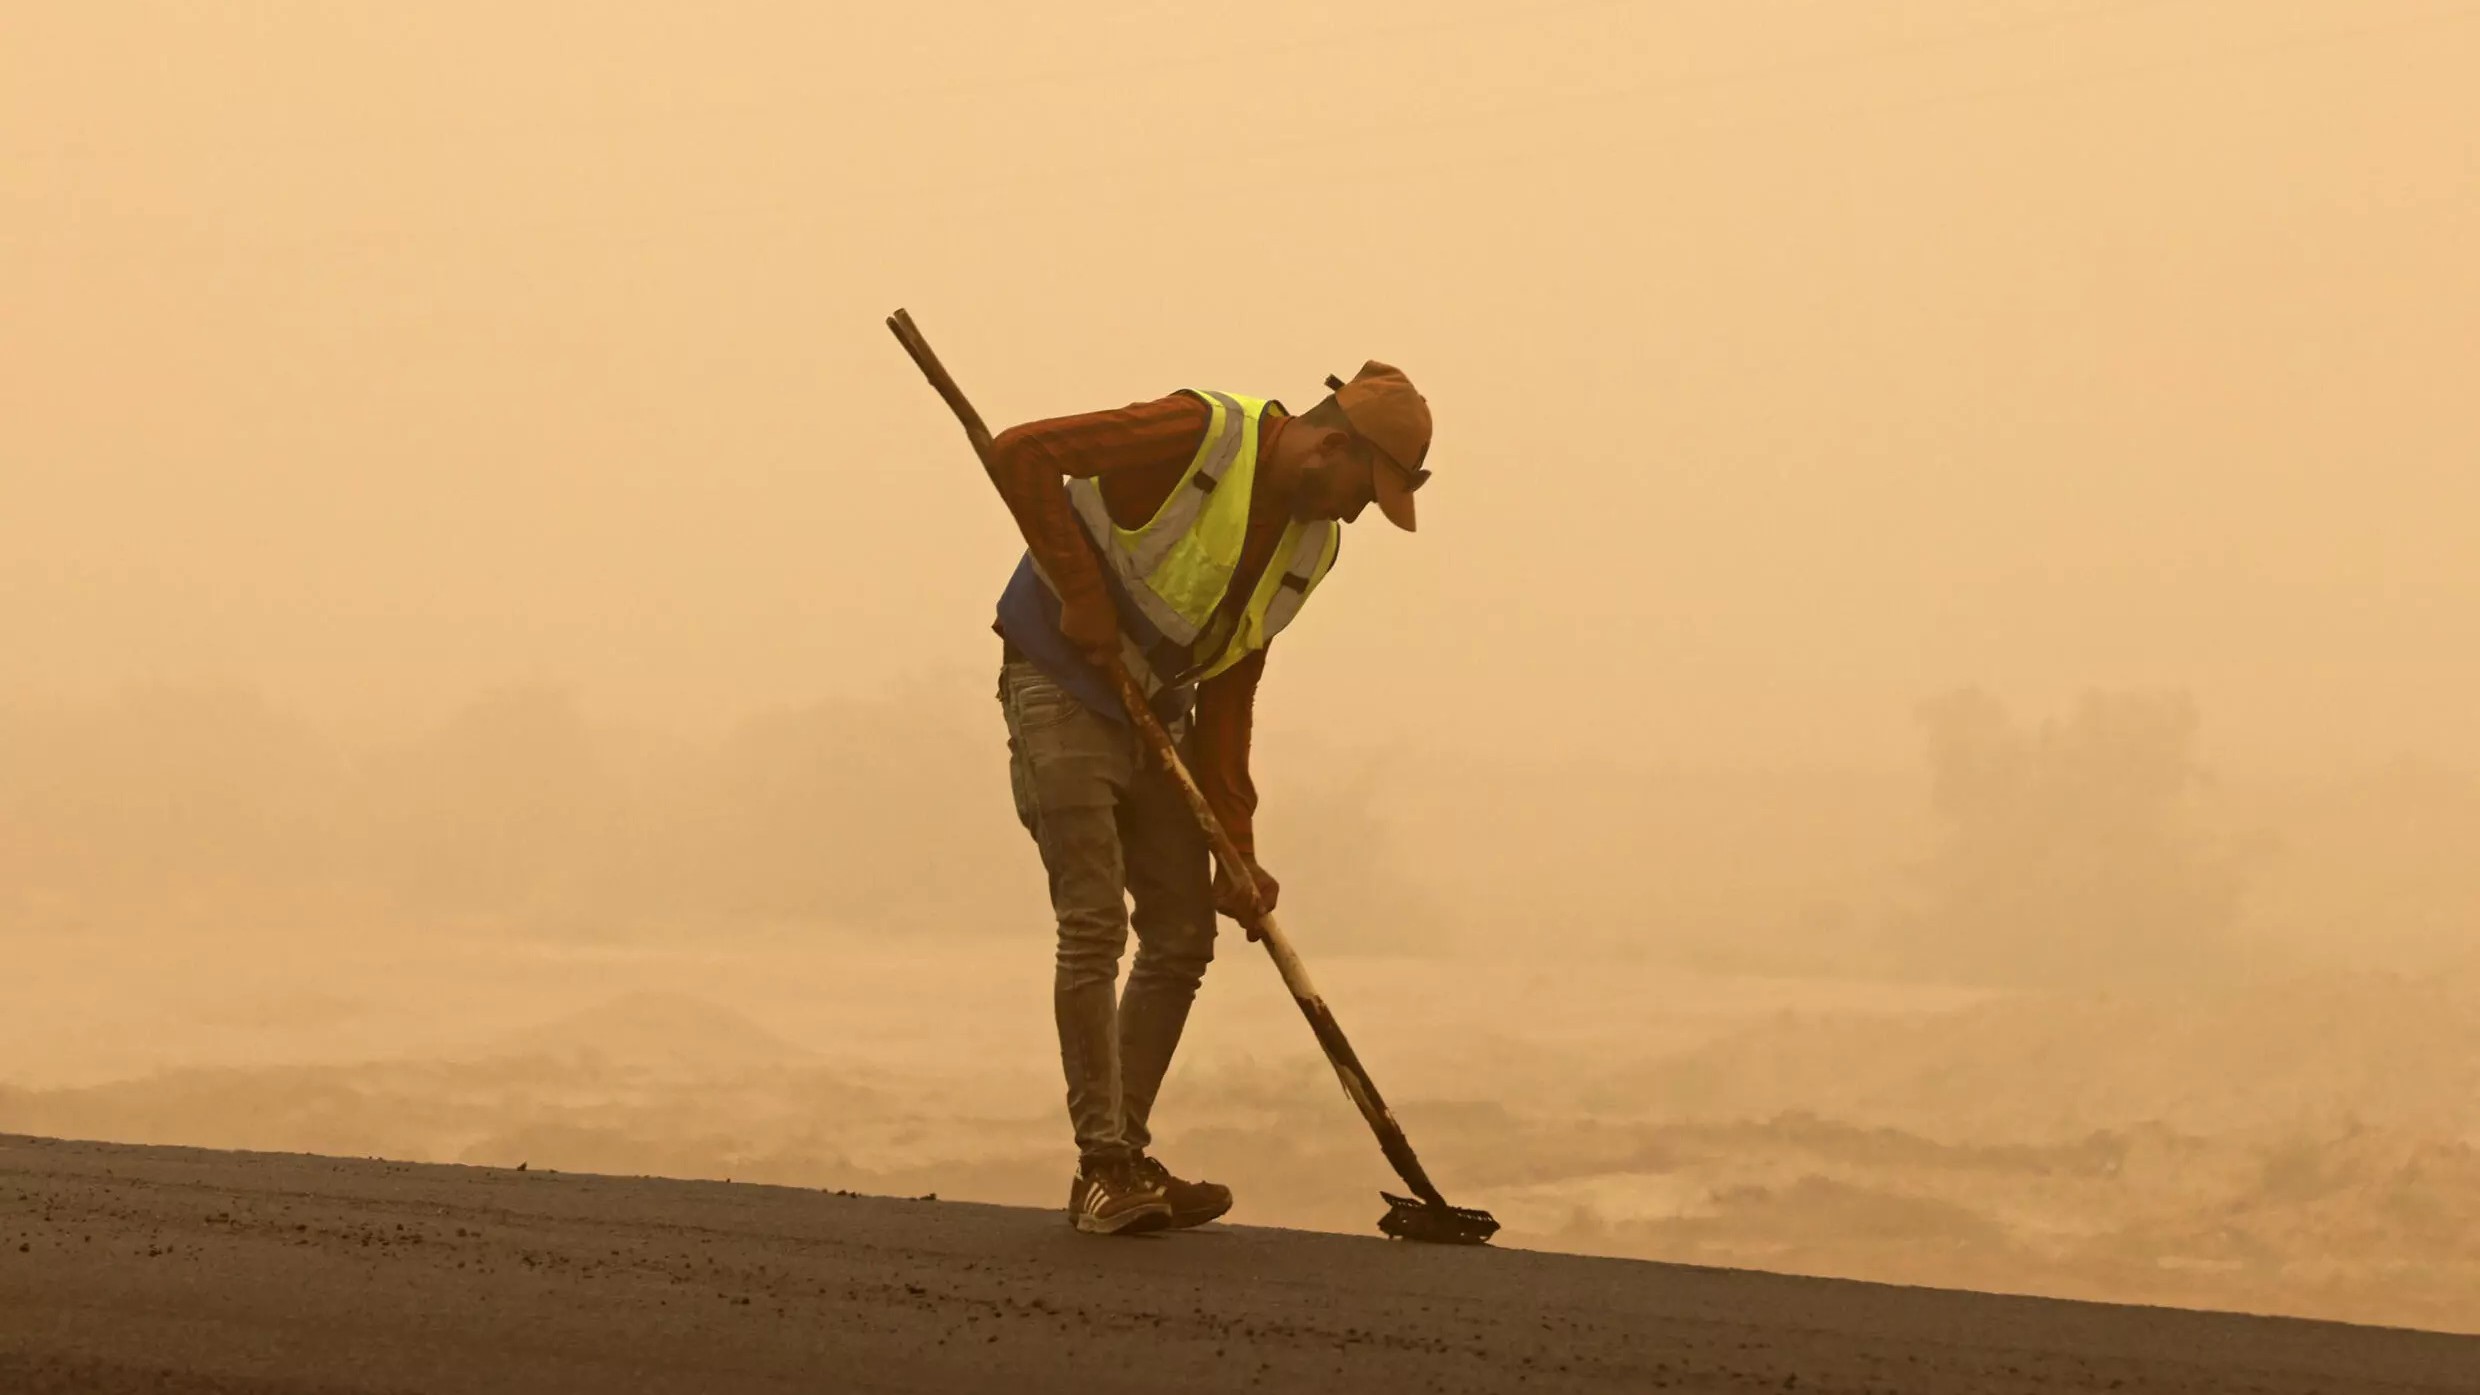 A worker sweeps a road during a sandstorm in Iraq's Diyala province, on July 3: oil-rich Iraq is ranked one of the five countries most vulnerable to the impacts of climate change and desertification (photo: AHMAD AL-RUBAYE/AFP) 